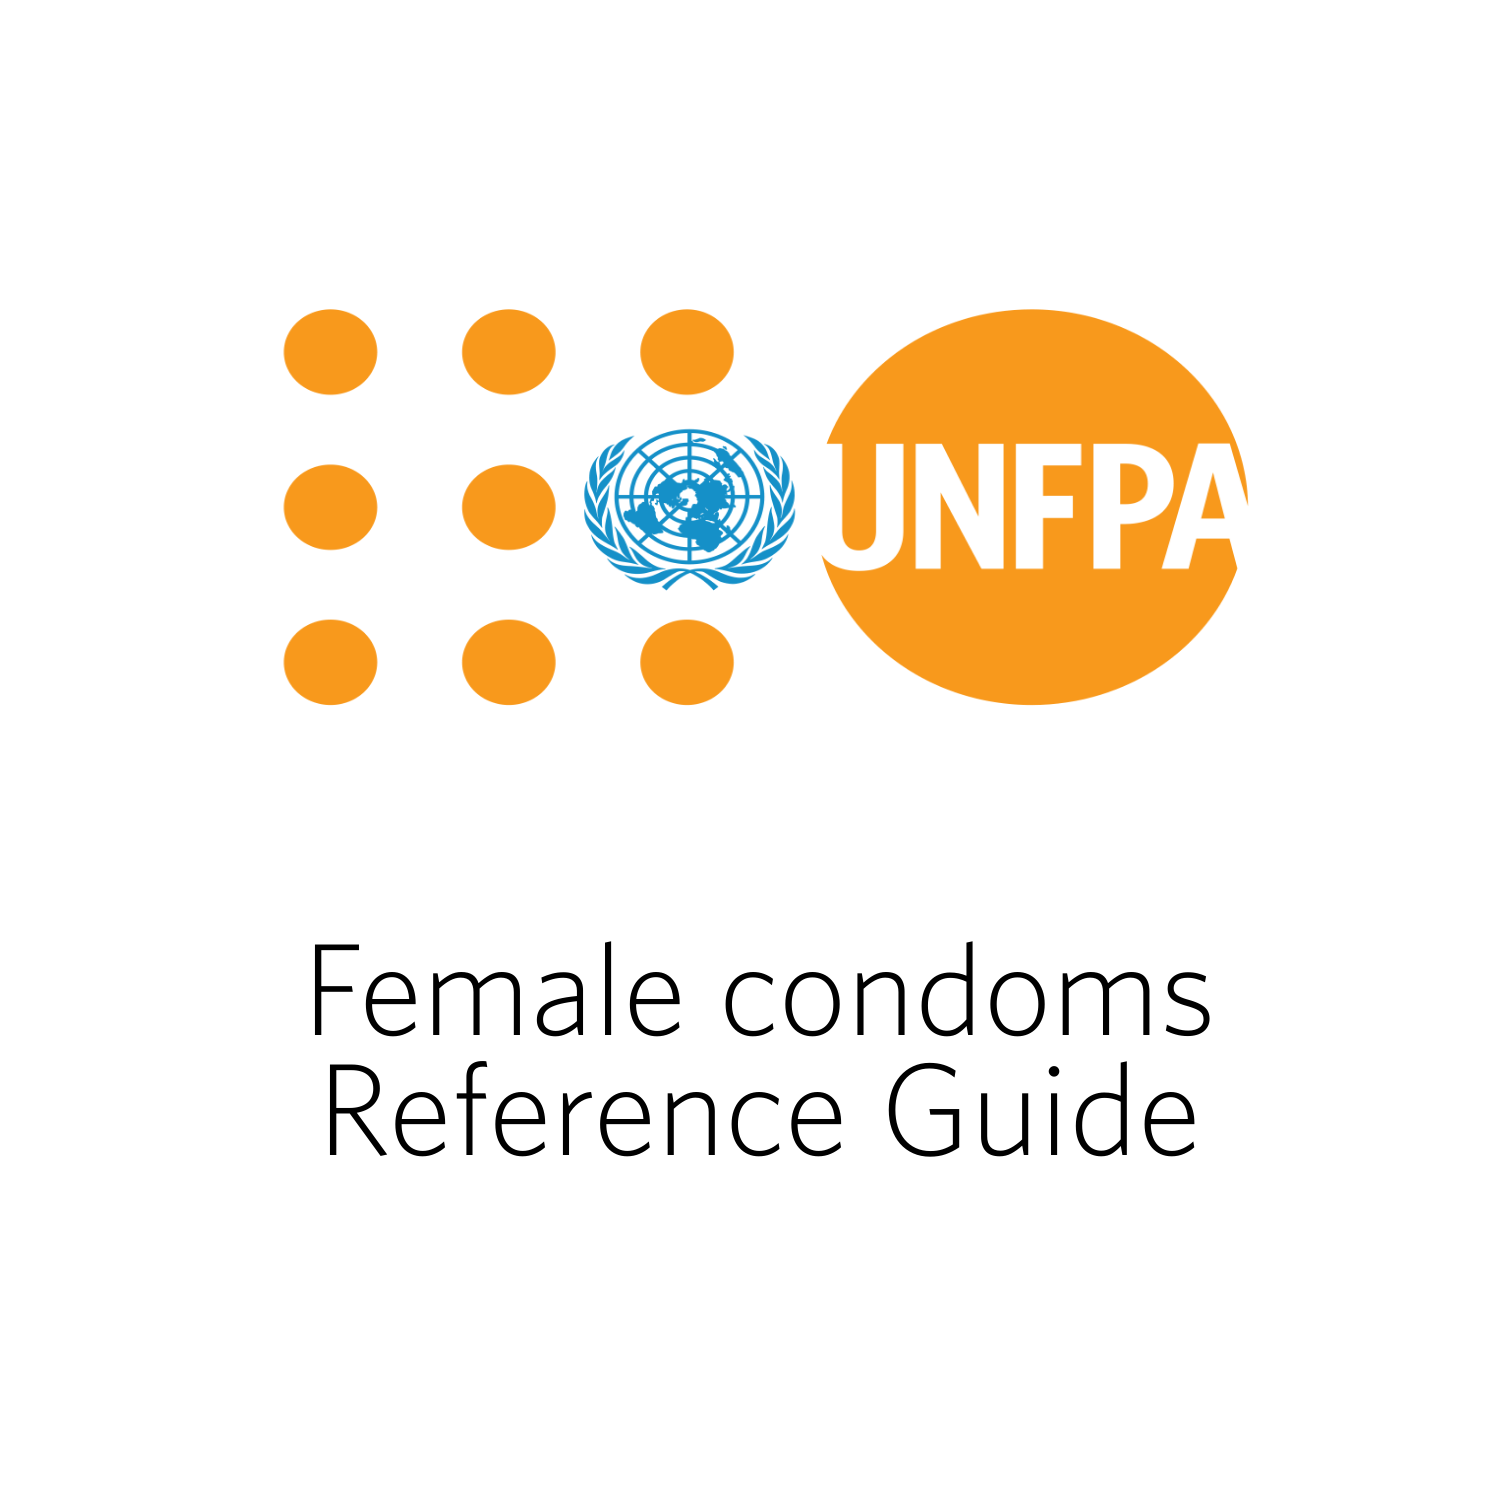 Female condoms reference guide